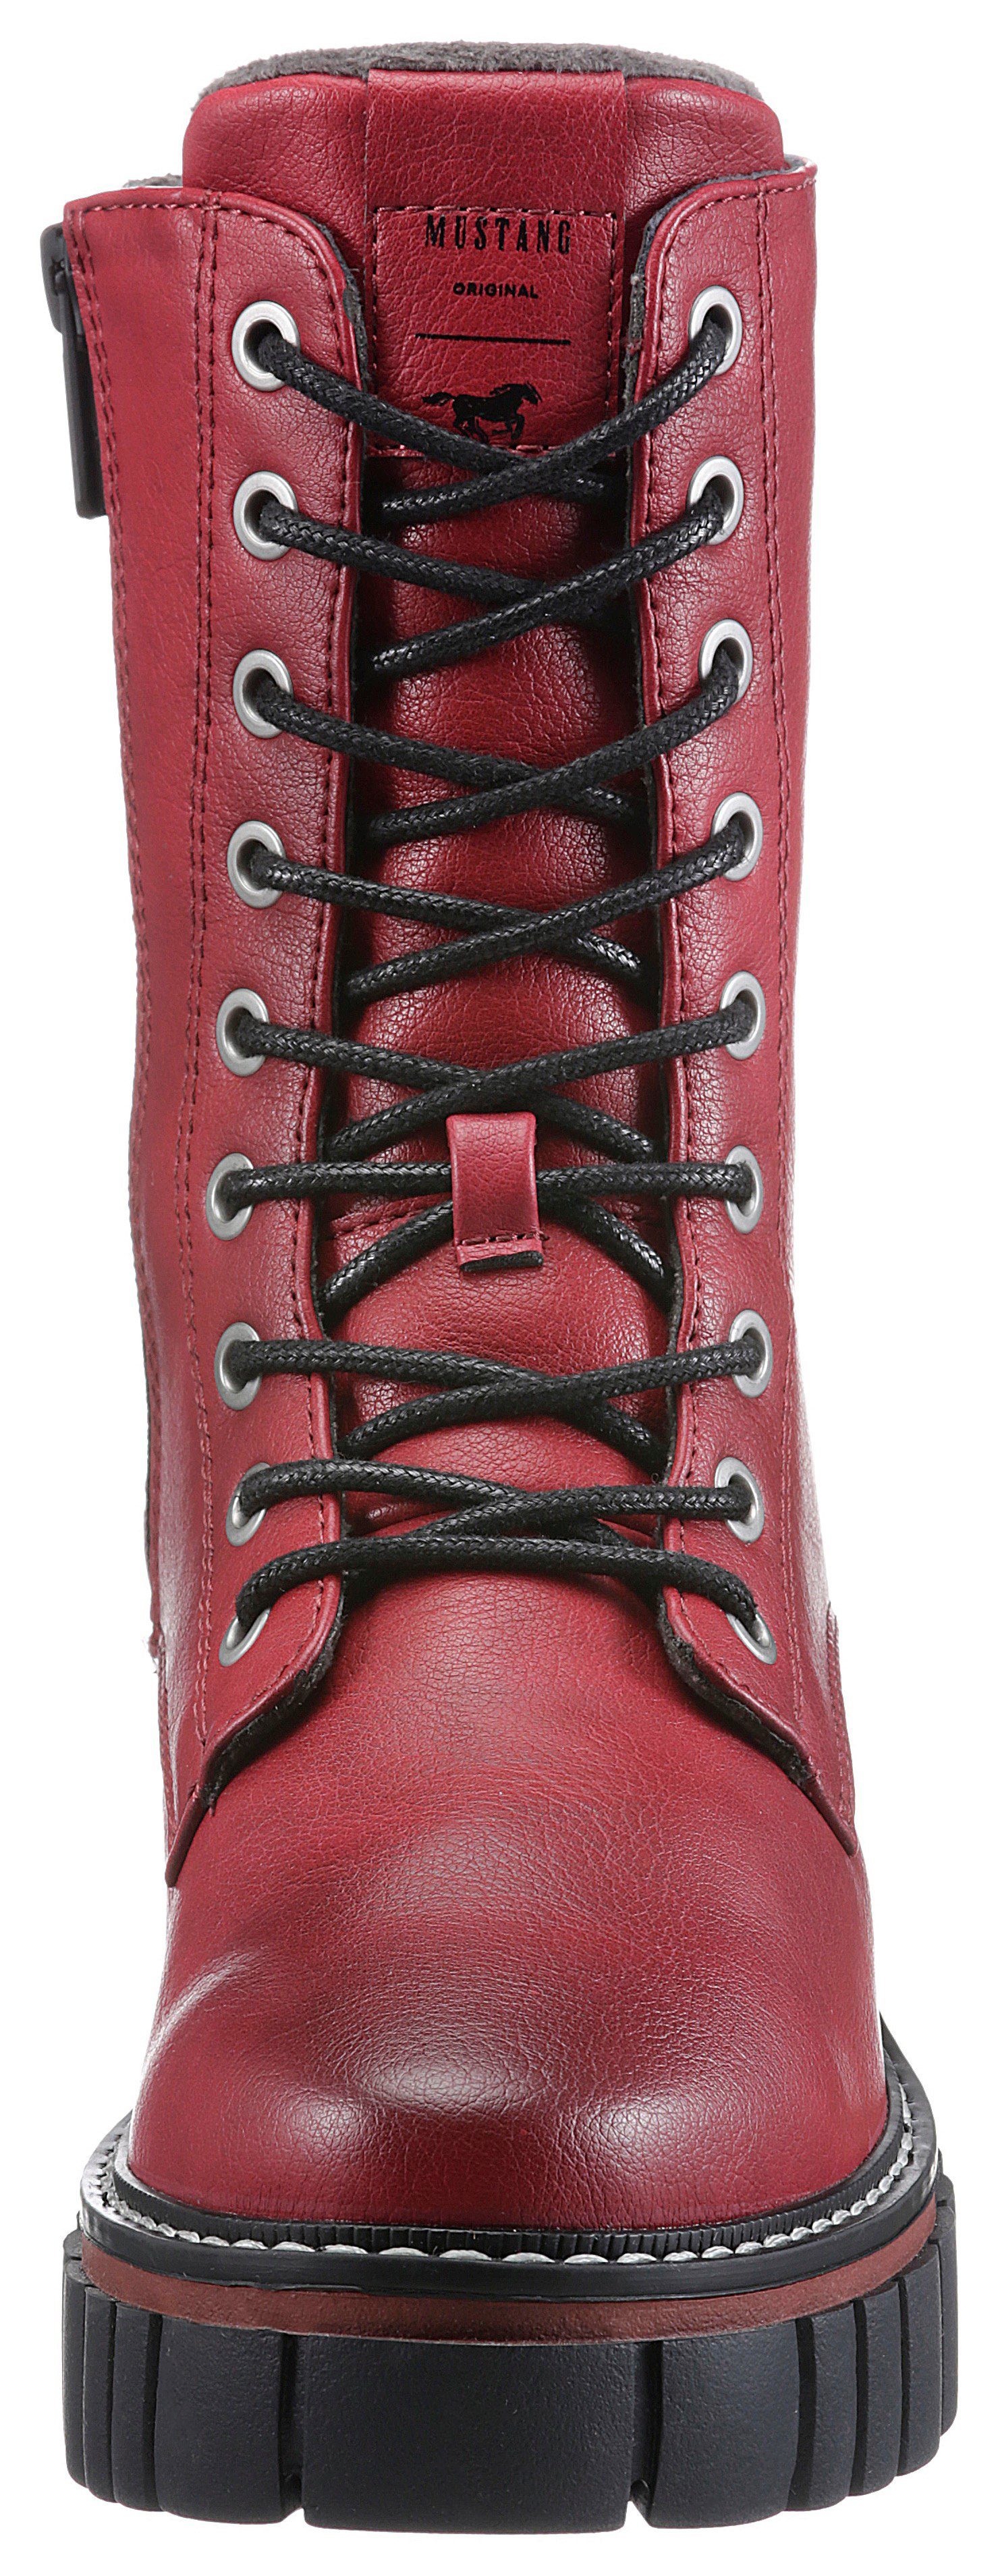 mit Schnürboots rot Shoes Profilsohle Mustang